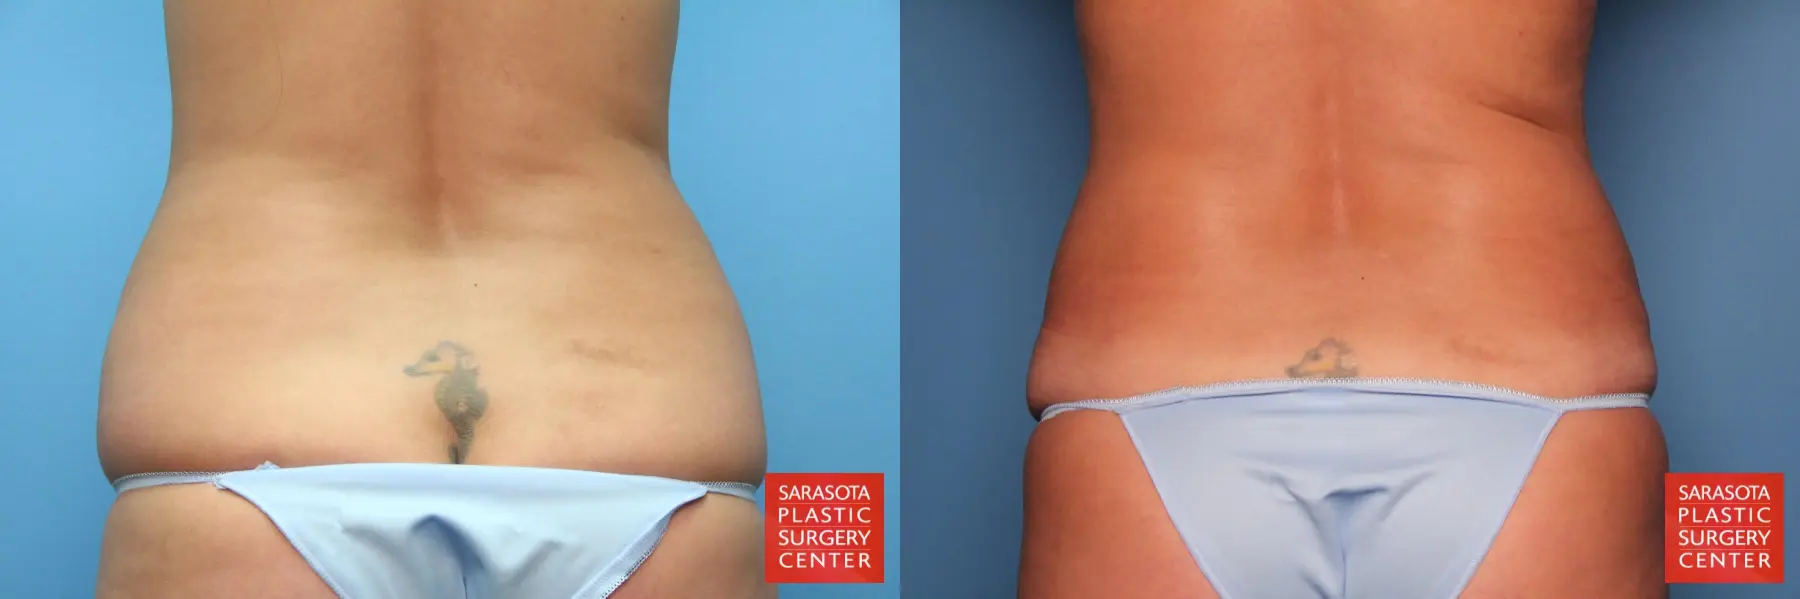 Tummy Tuck: Patient 12 - Before and After 5